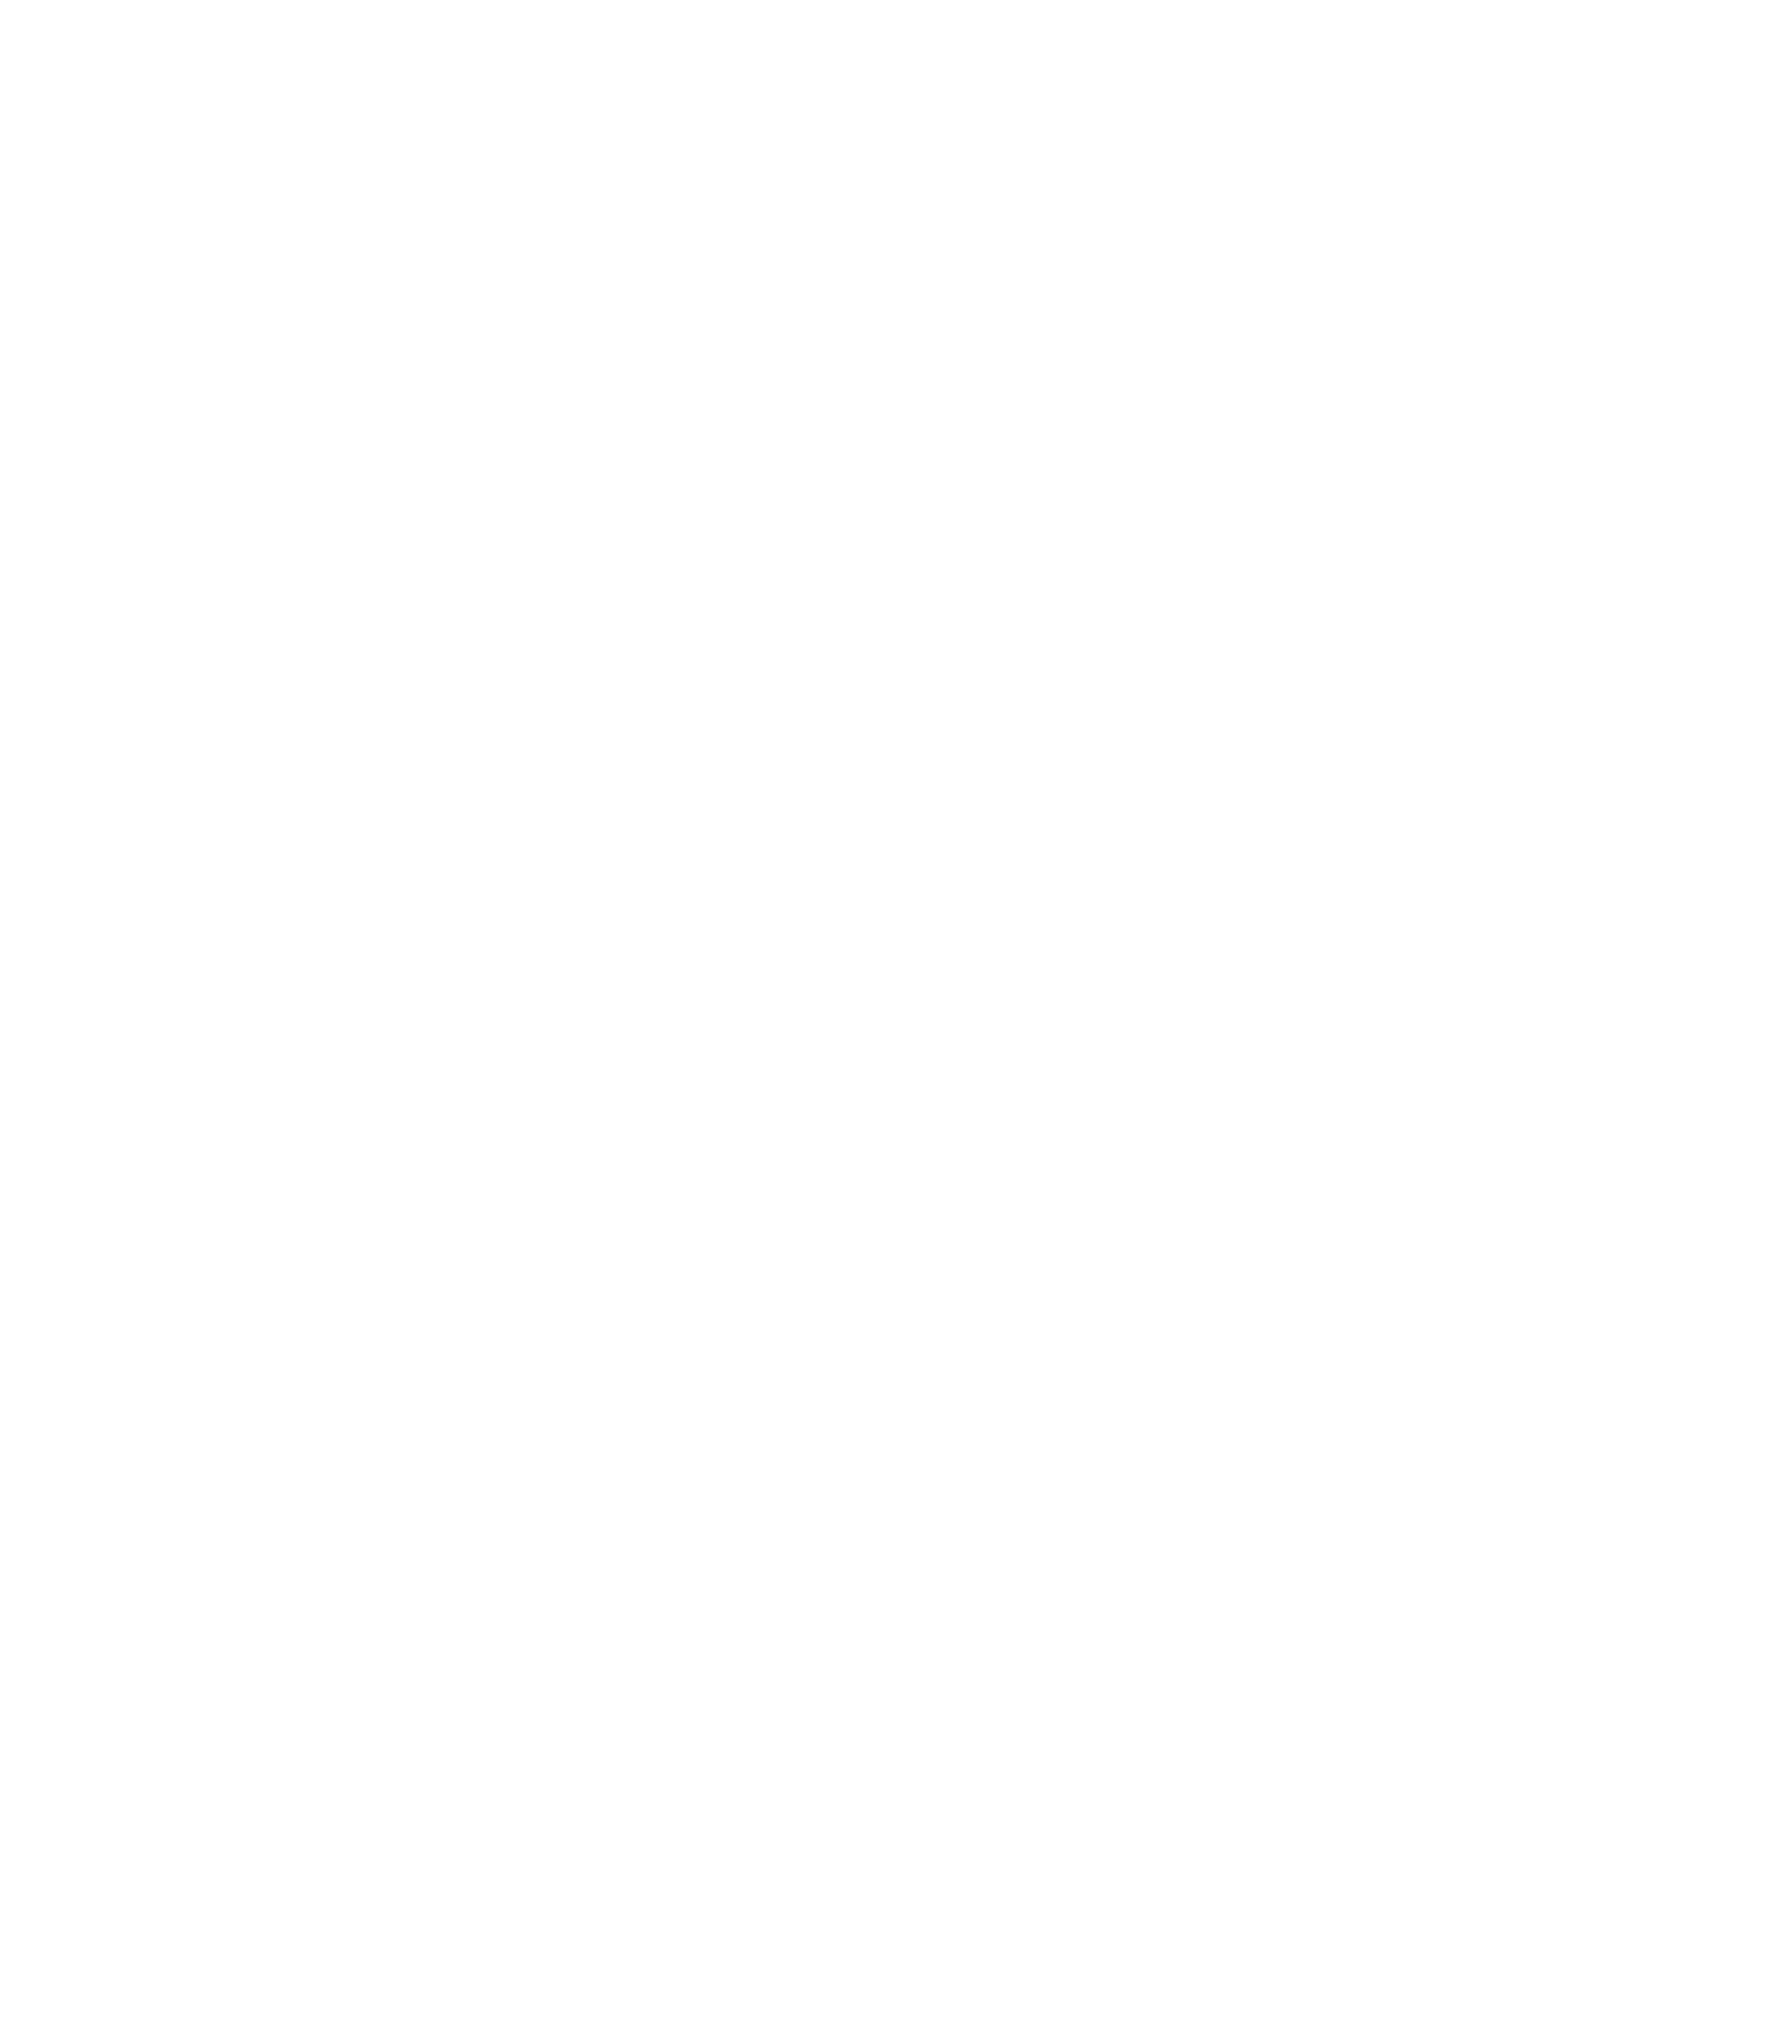 COMINDER-w.png